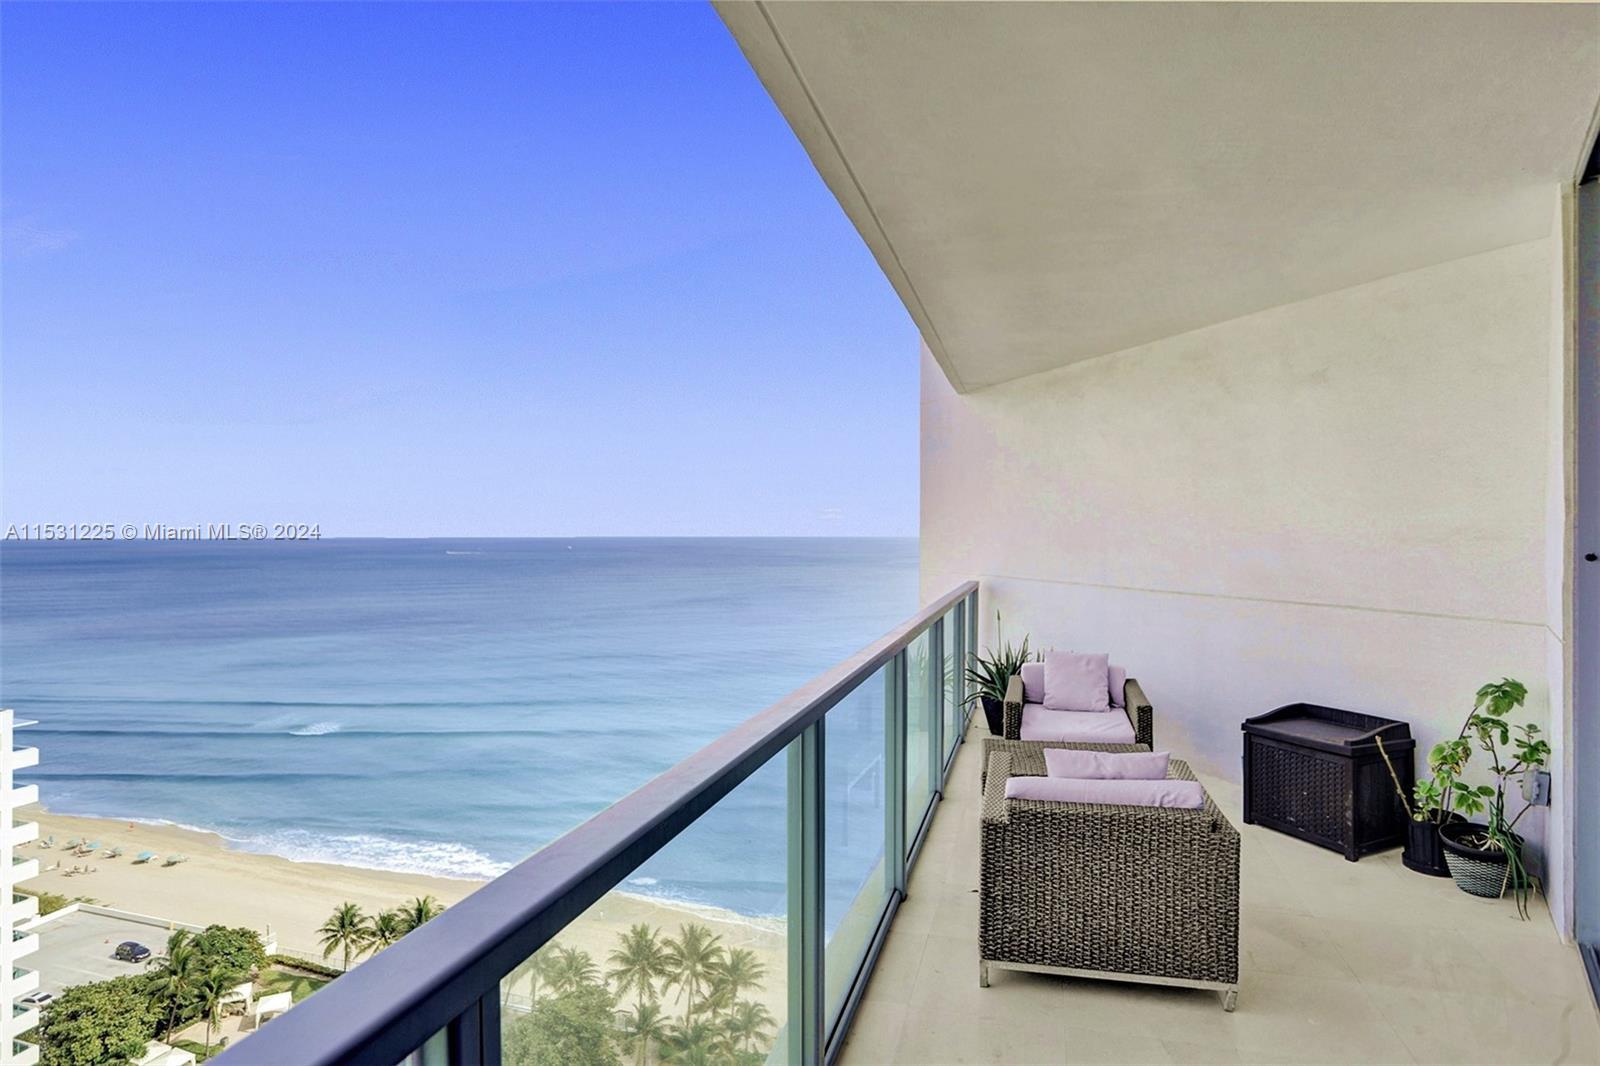 Photo of 3101 S Ocean Dr #2005 (Available May 19) in Hollywood, FL